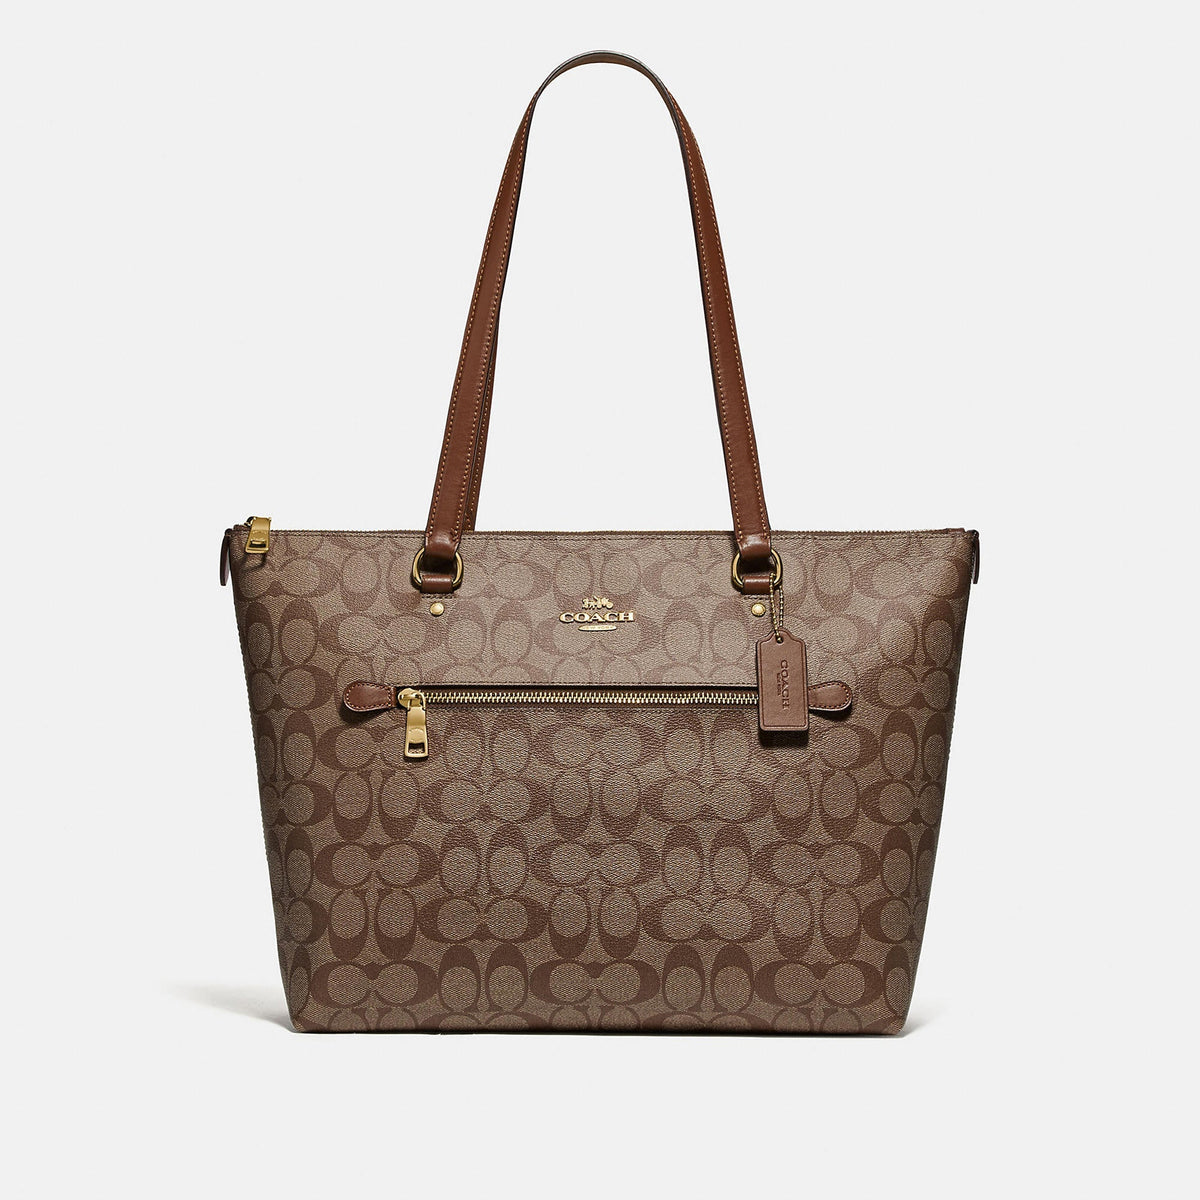 Coach Outlet Gallery Tote In Signature Canvas - TJ Outlet